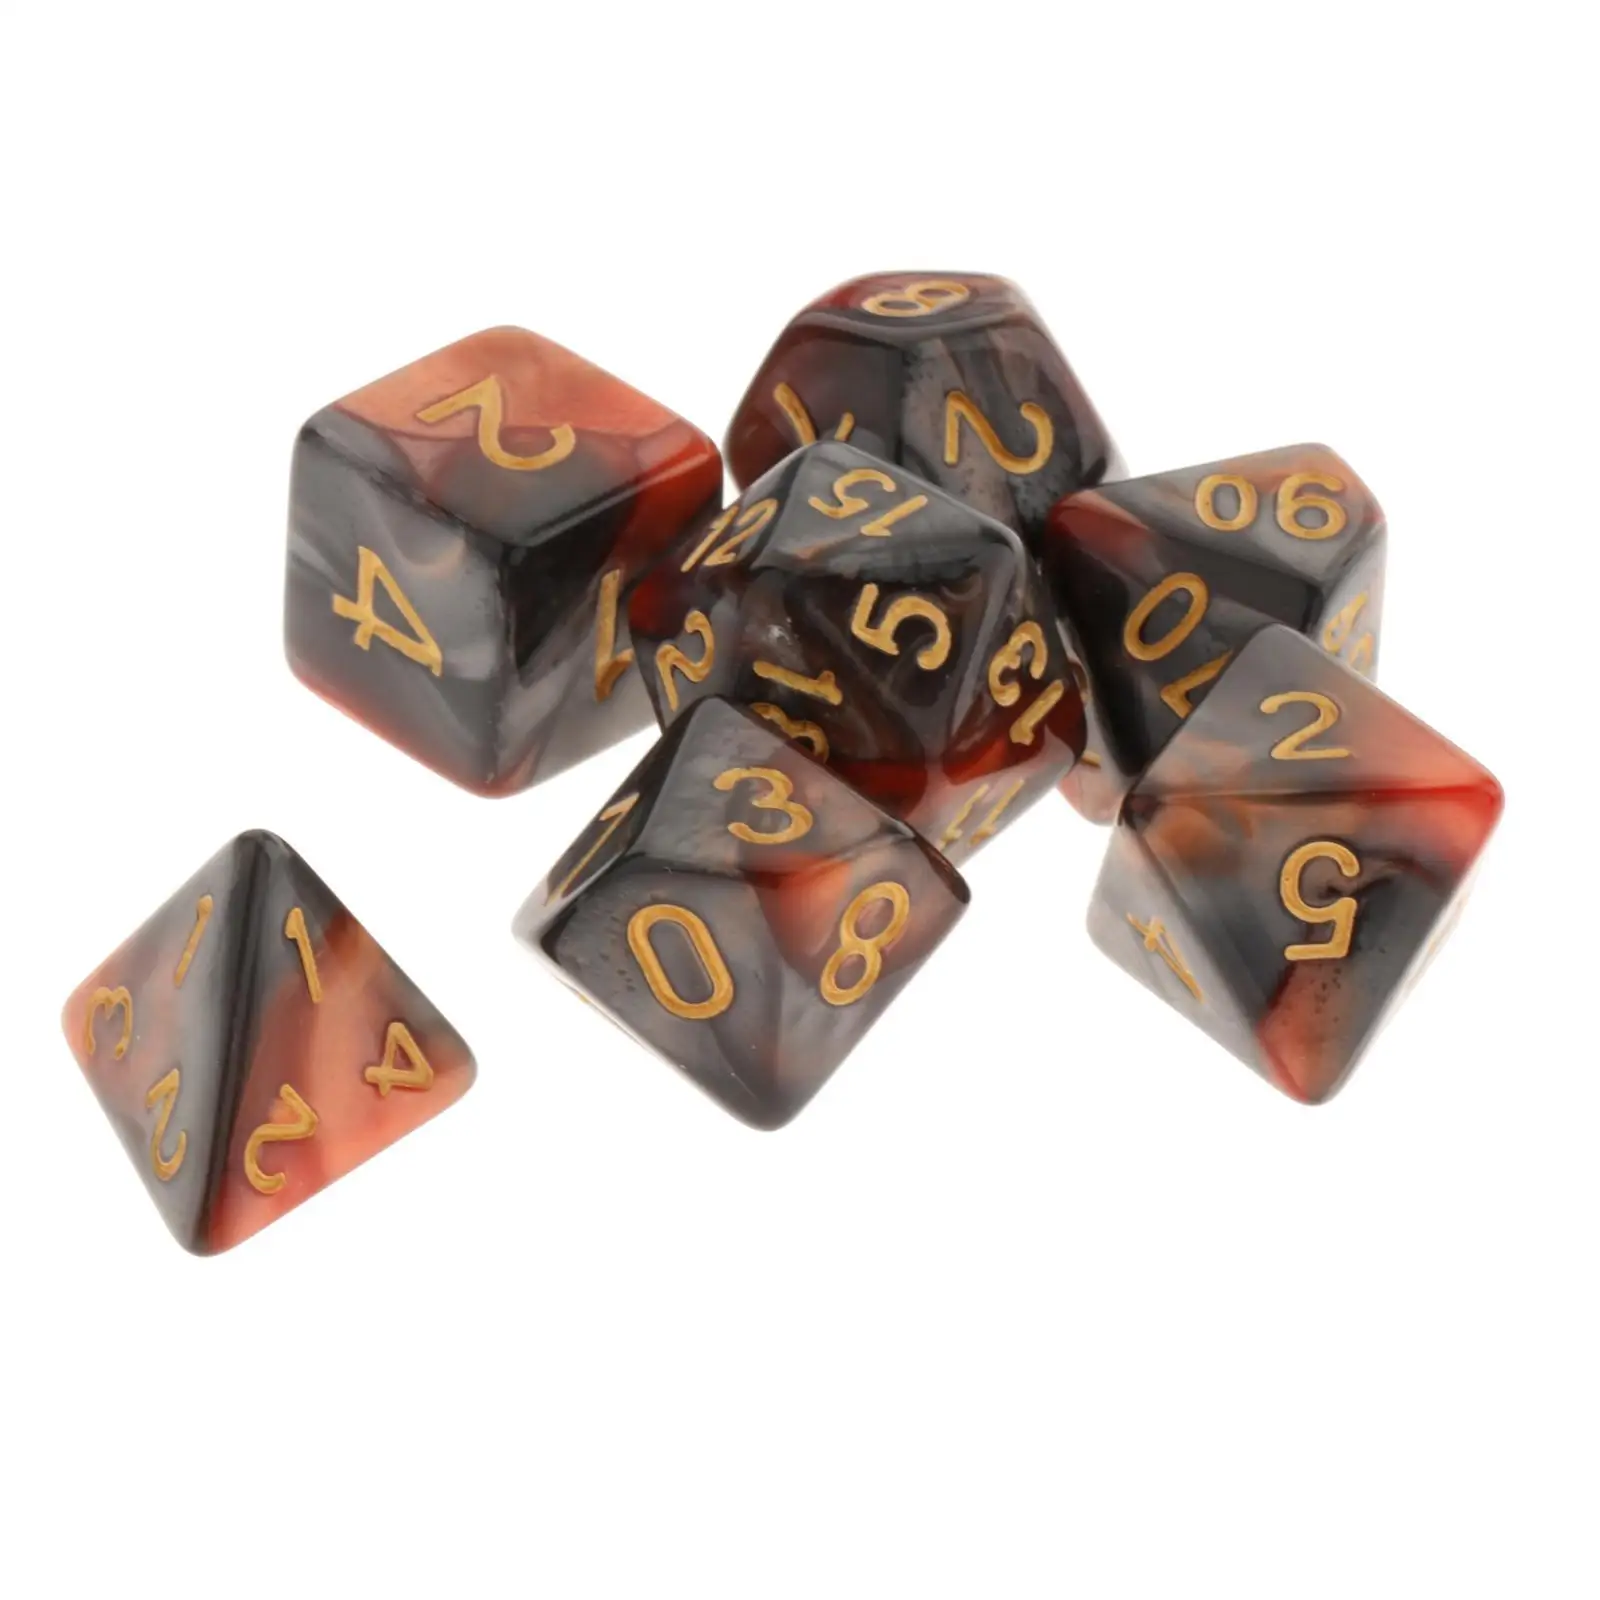 14x Polyhedral Dice Die Party Game for Dungeons &Dragons RPG Casino Supplies 